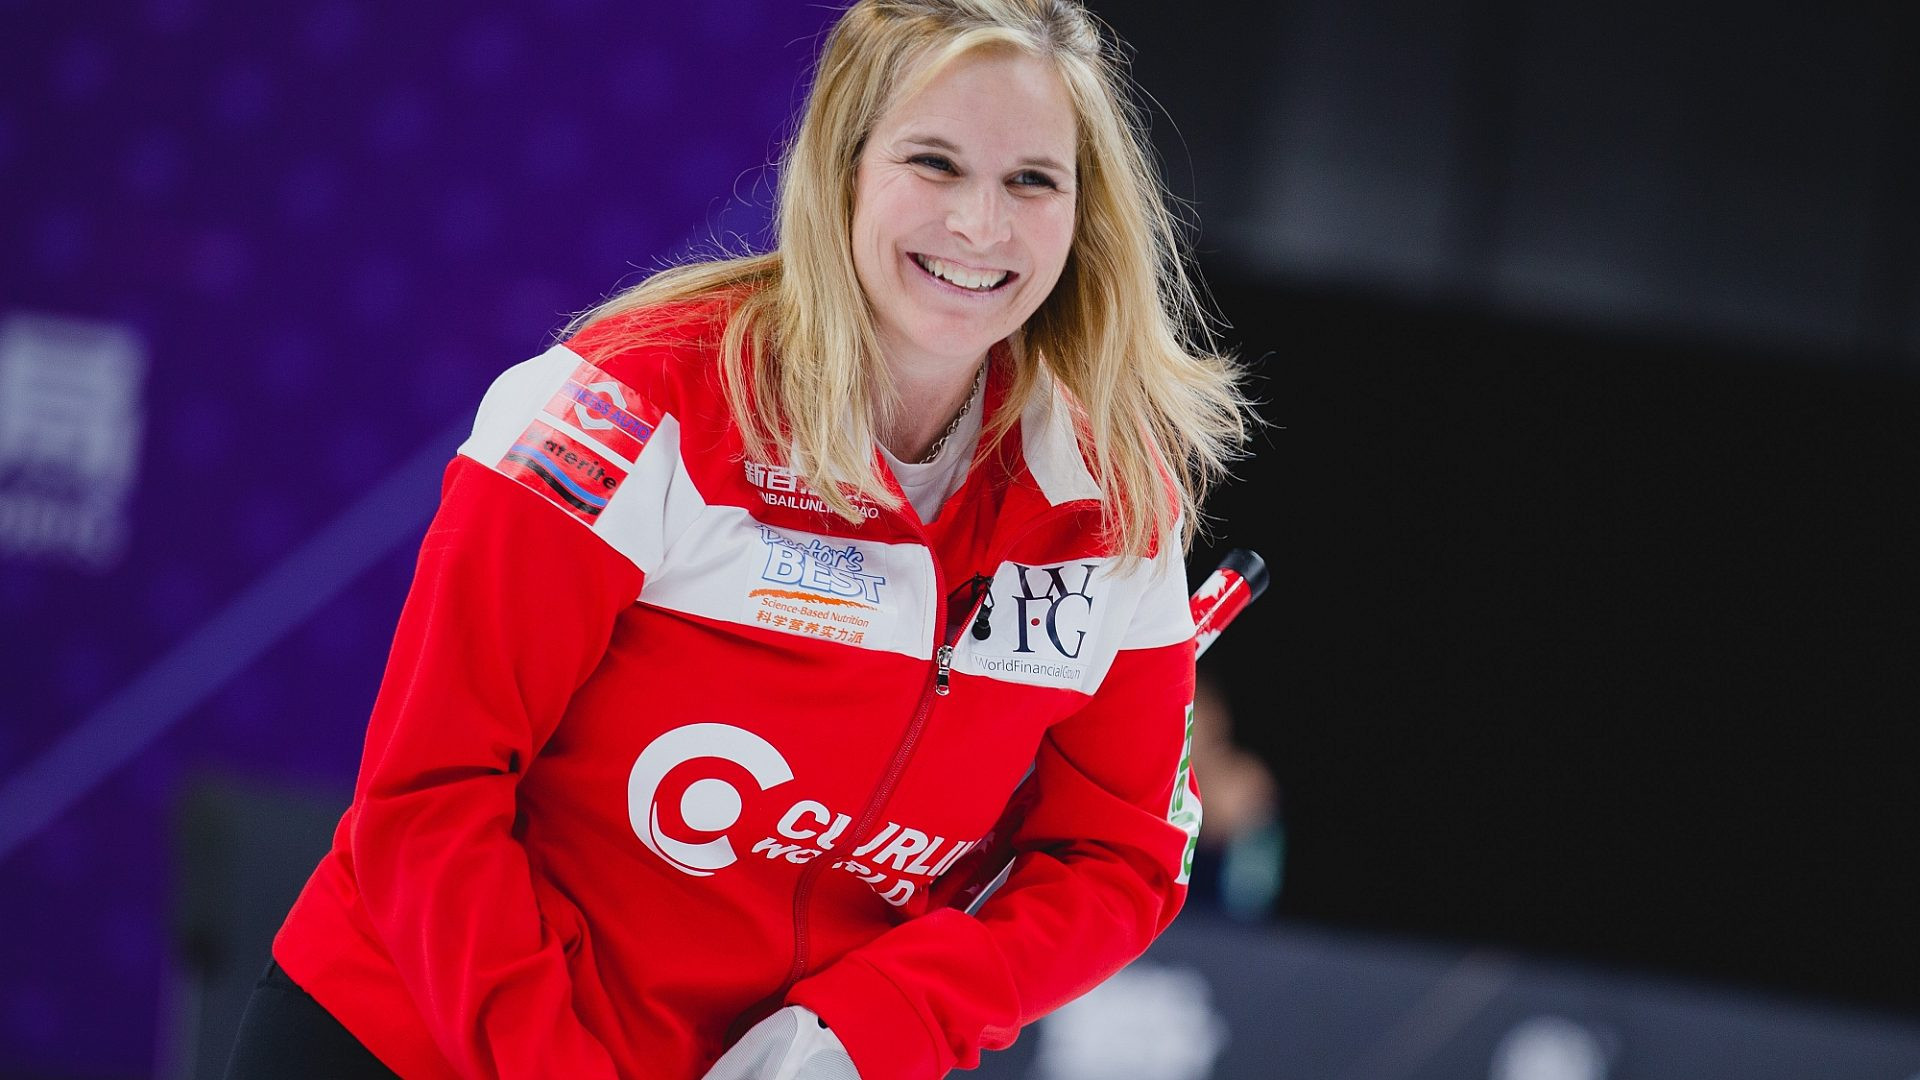 Despite two losses today, the Canada rink skipped by Jennifer Jones will play world champions Switzerland tomorrow for women's gold at the Curling World Cup Grand Final in Beijing ©World Curling